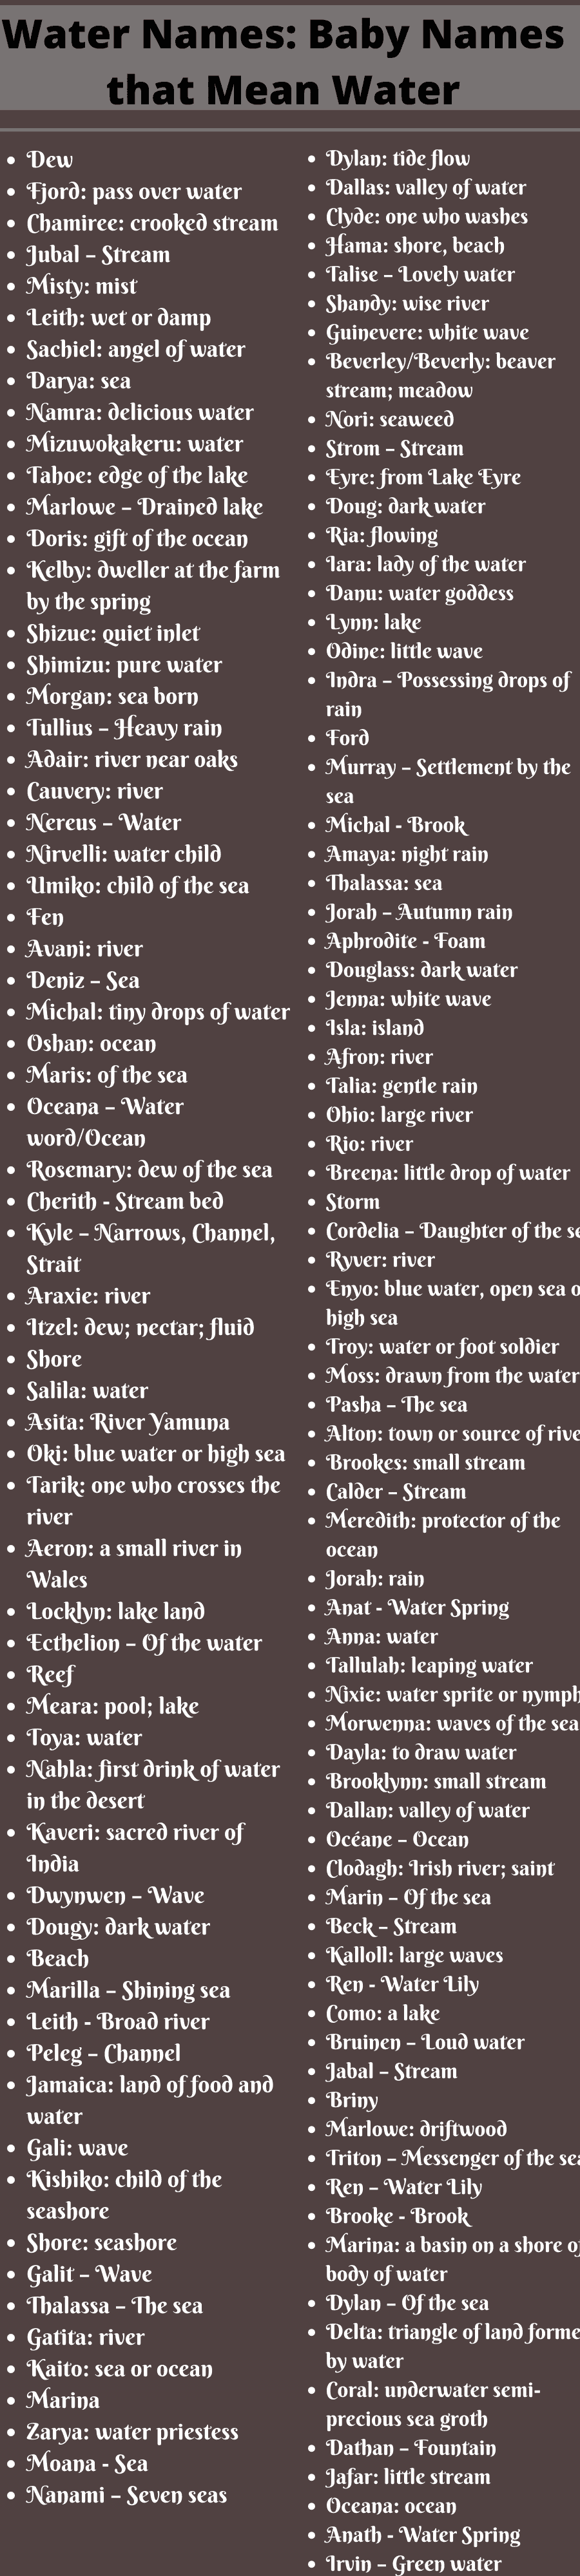 Water Names Baby Names that Mean Water